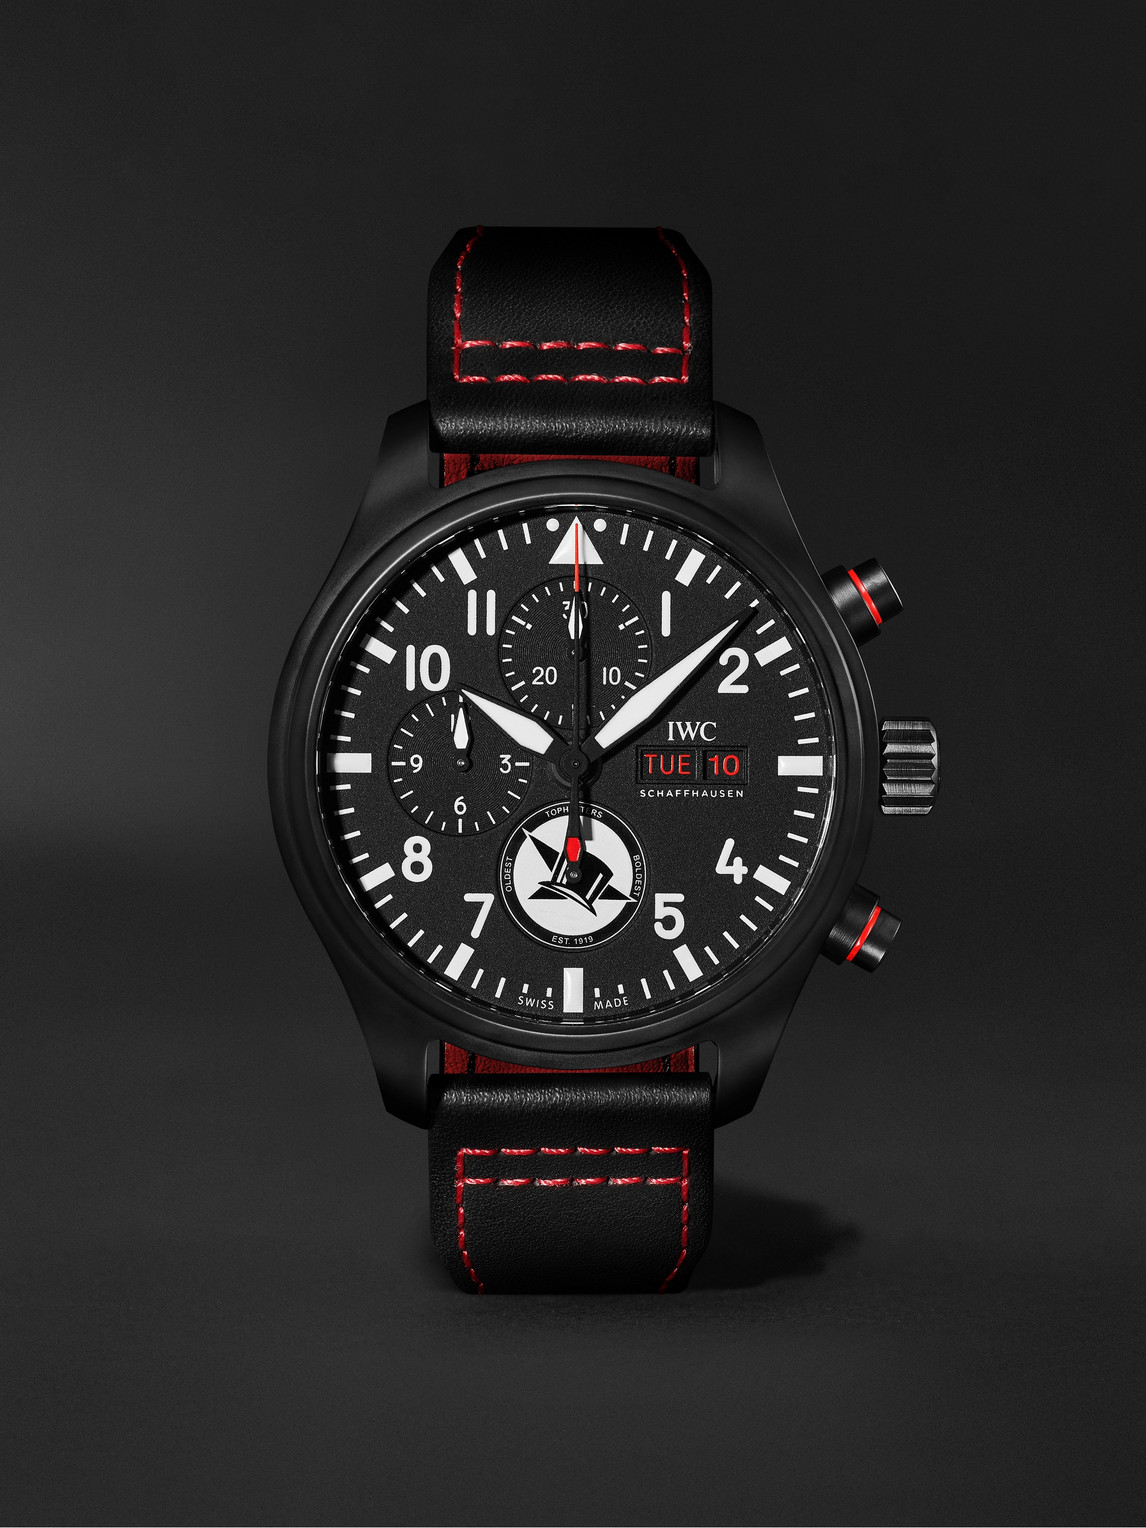 Iwc Schaffhausen Pilot's Tophatter Automatic Chronograph 44.5mm Ceramic And Leather Watch, Ref. No. Iw389108 In Black